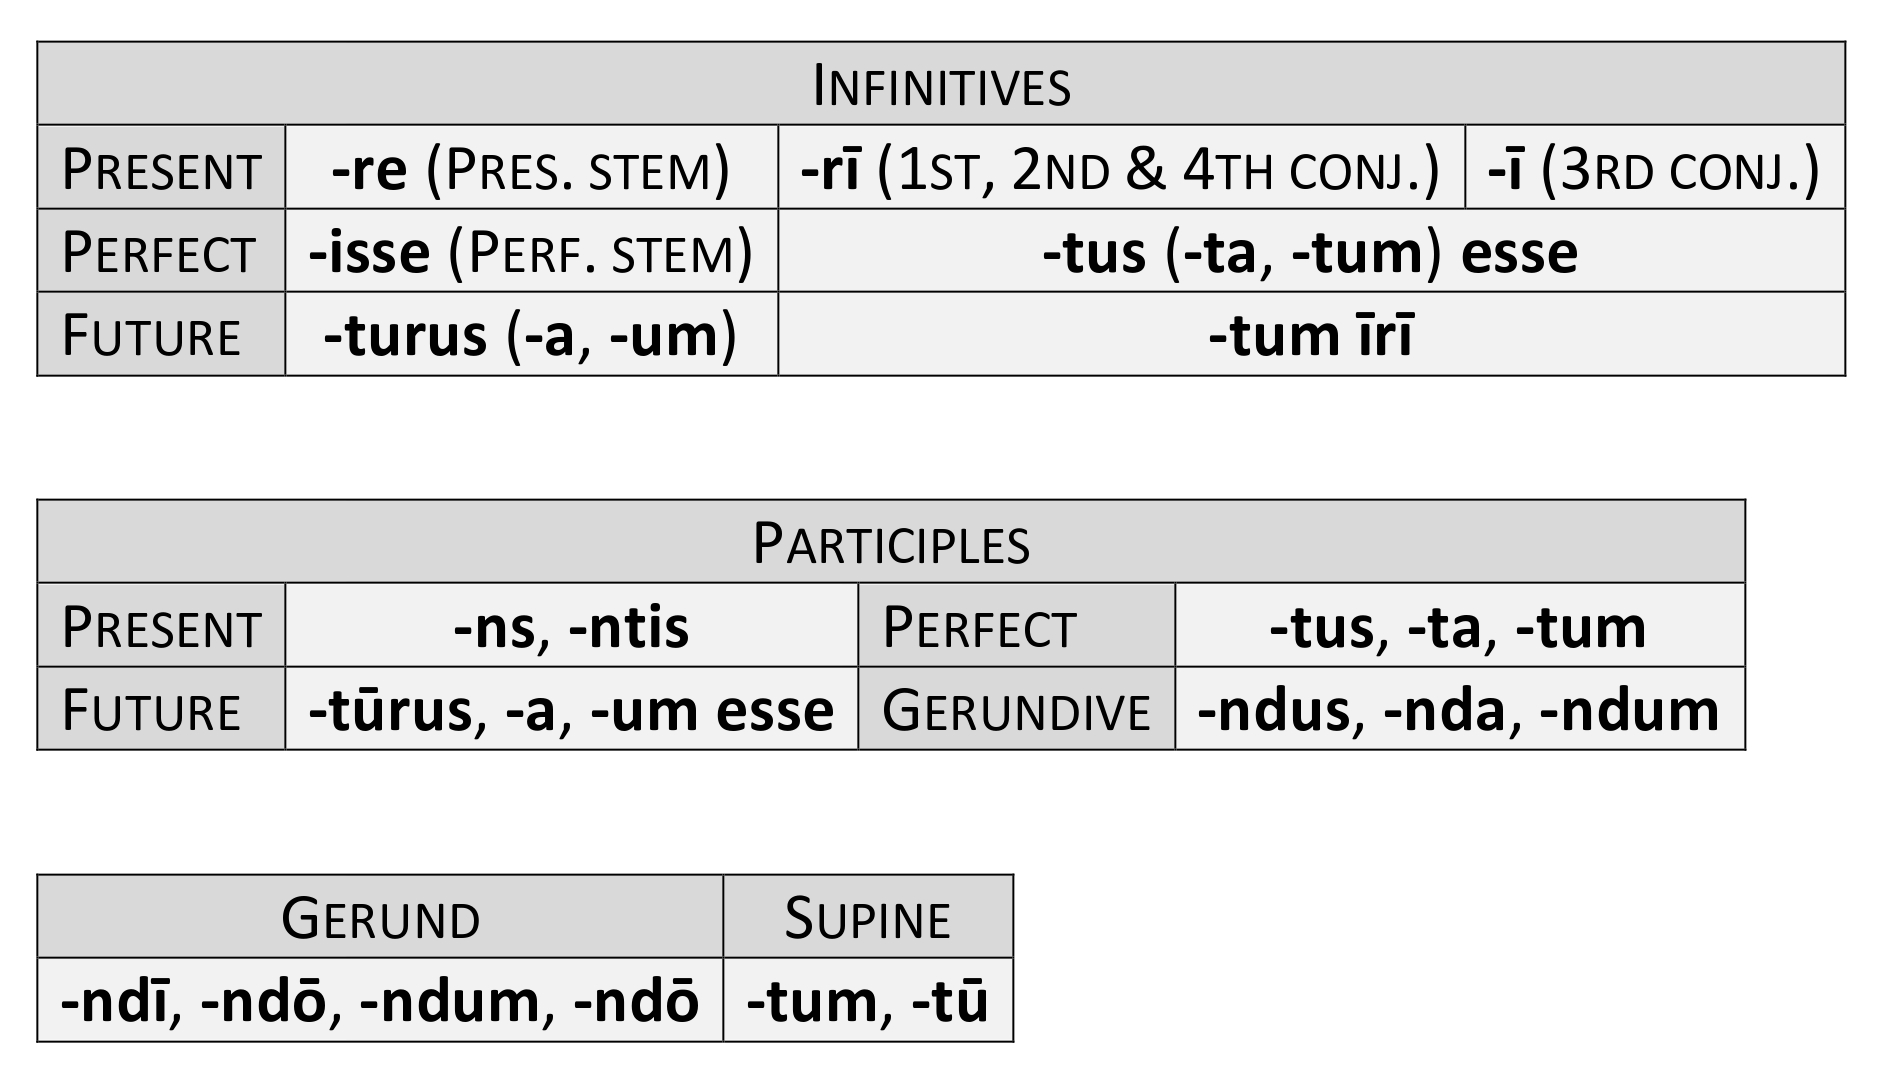 Verb endings for noun and adjective forms of the verb